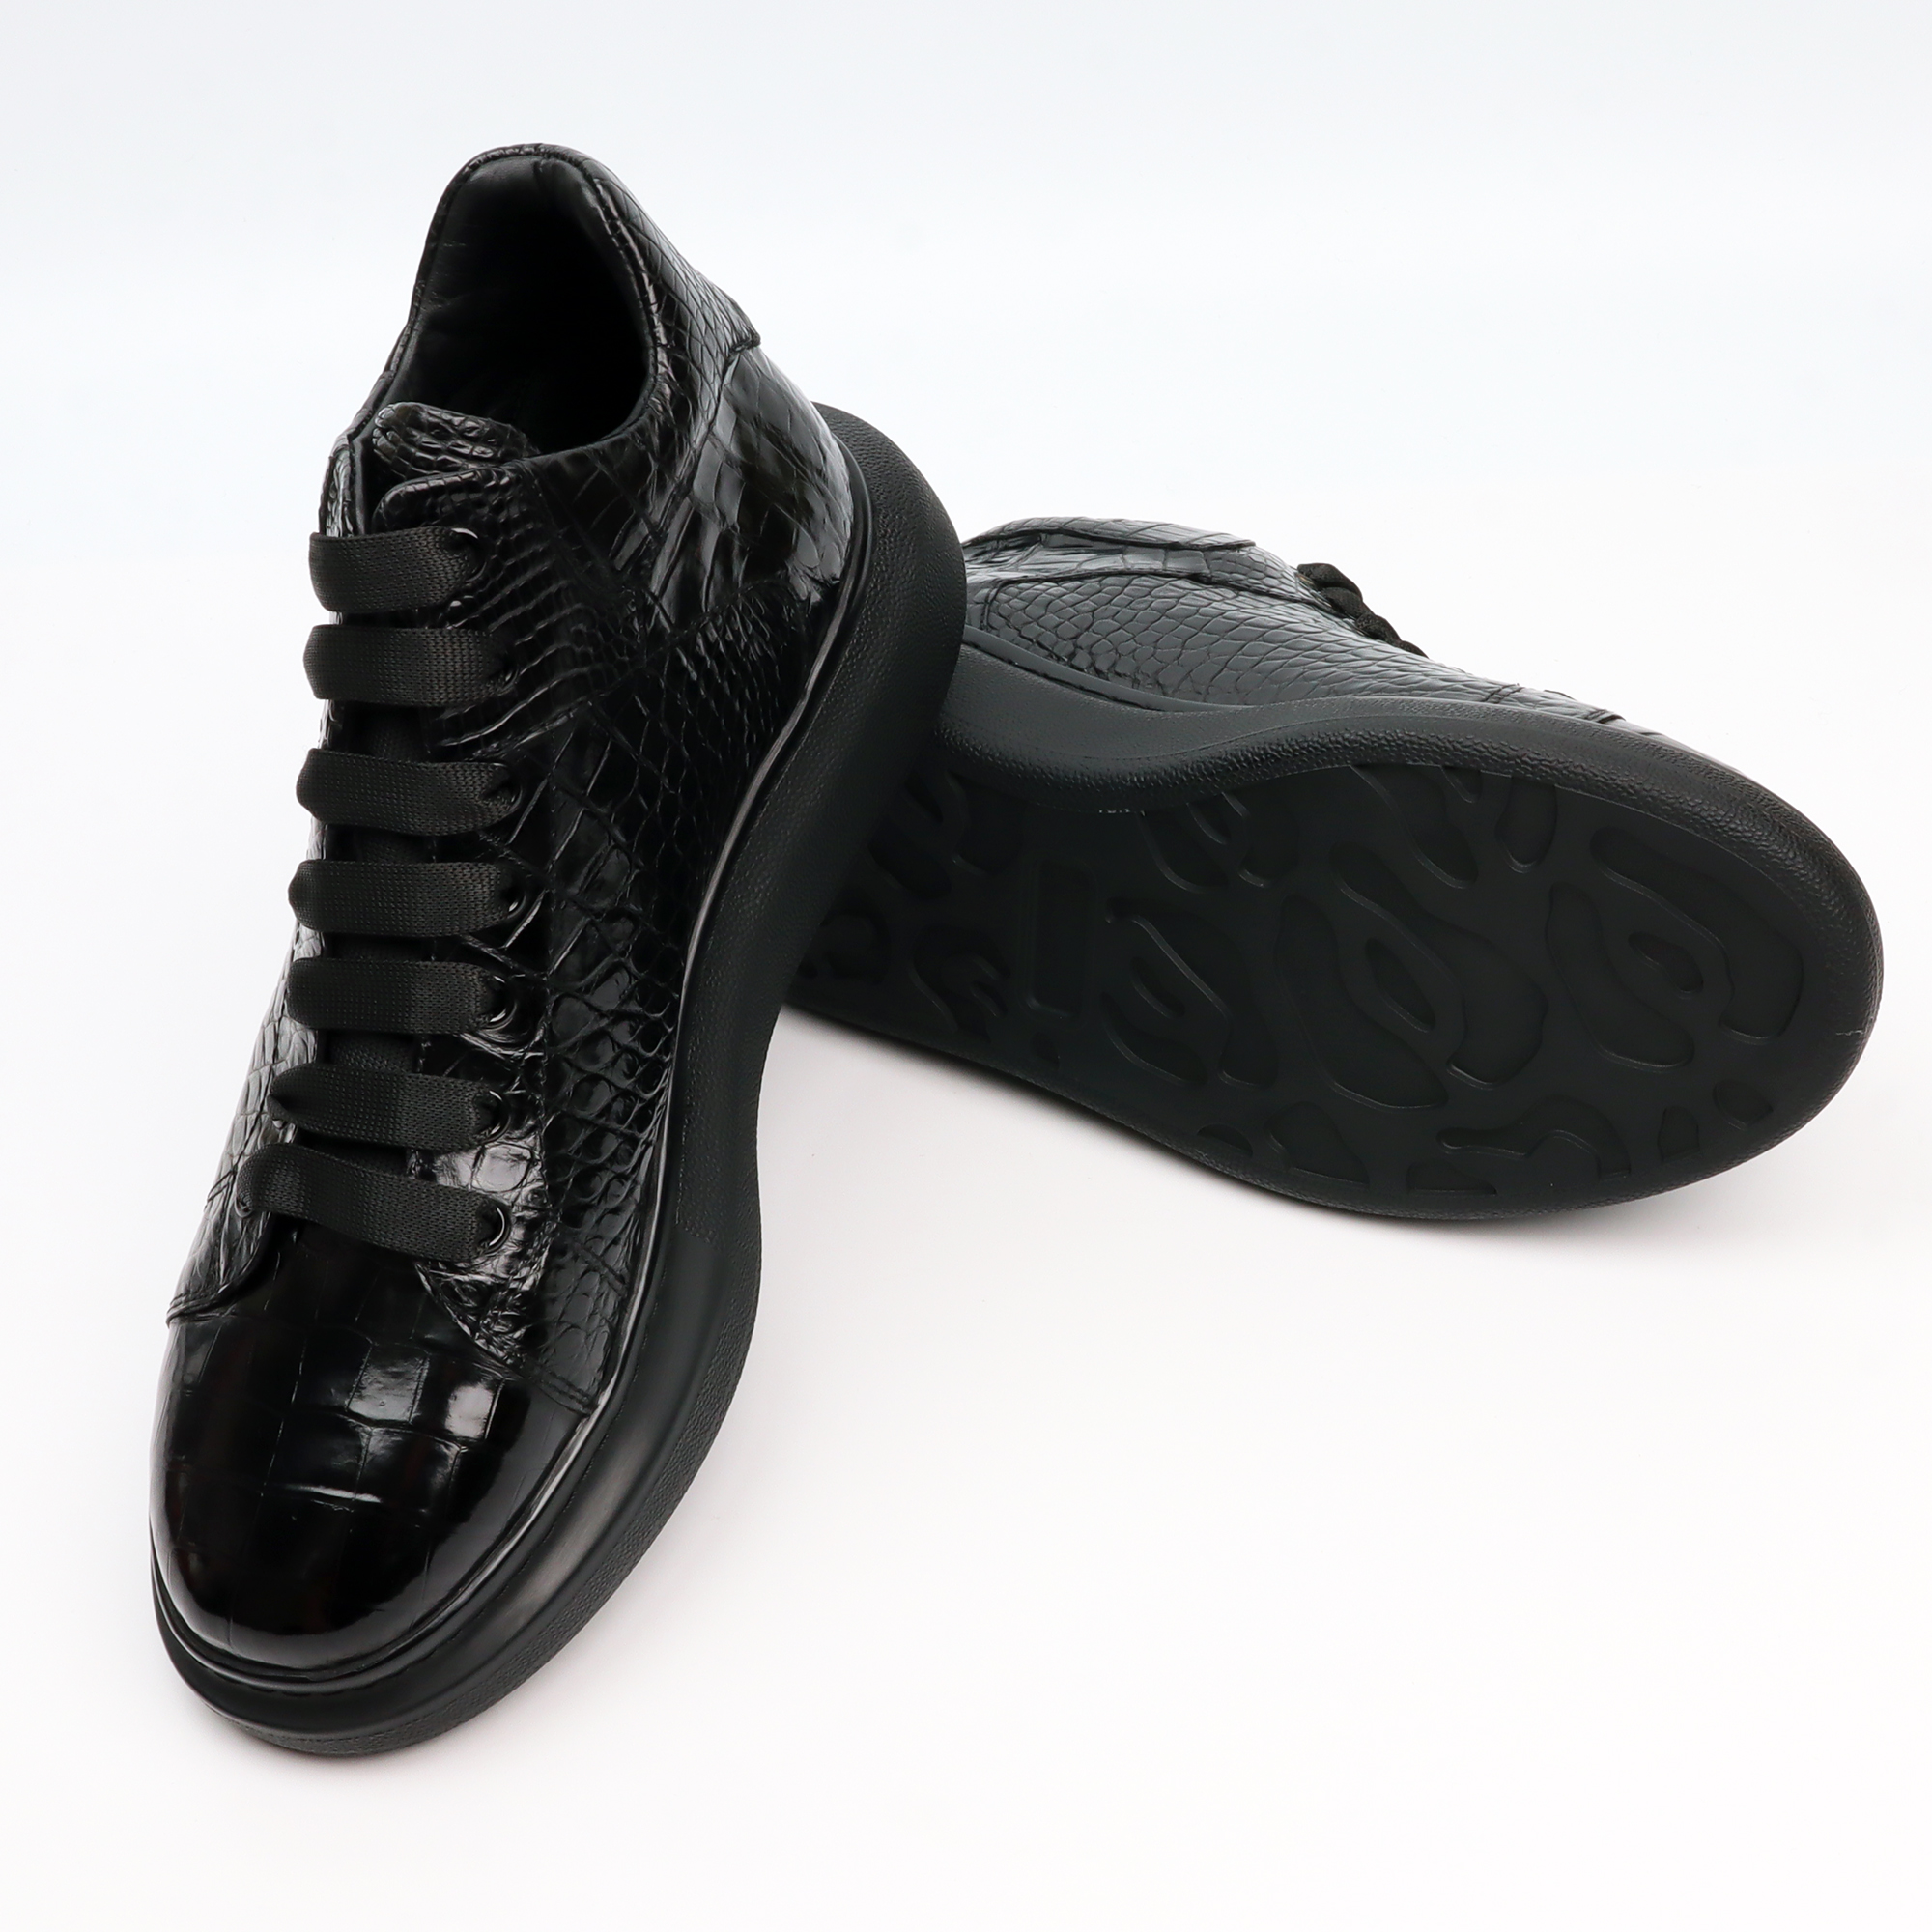 Men's Genuine Crocodile Leather Sneakers Boots Black Shoes Basic